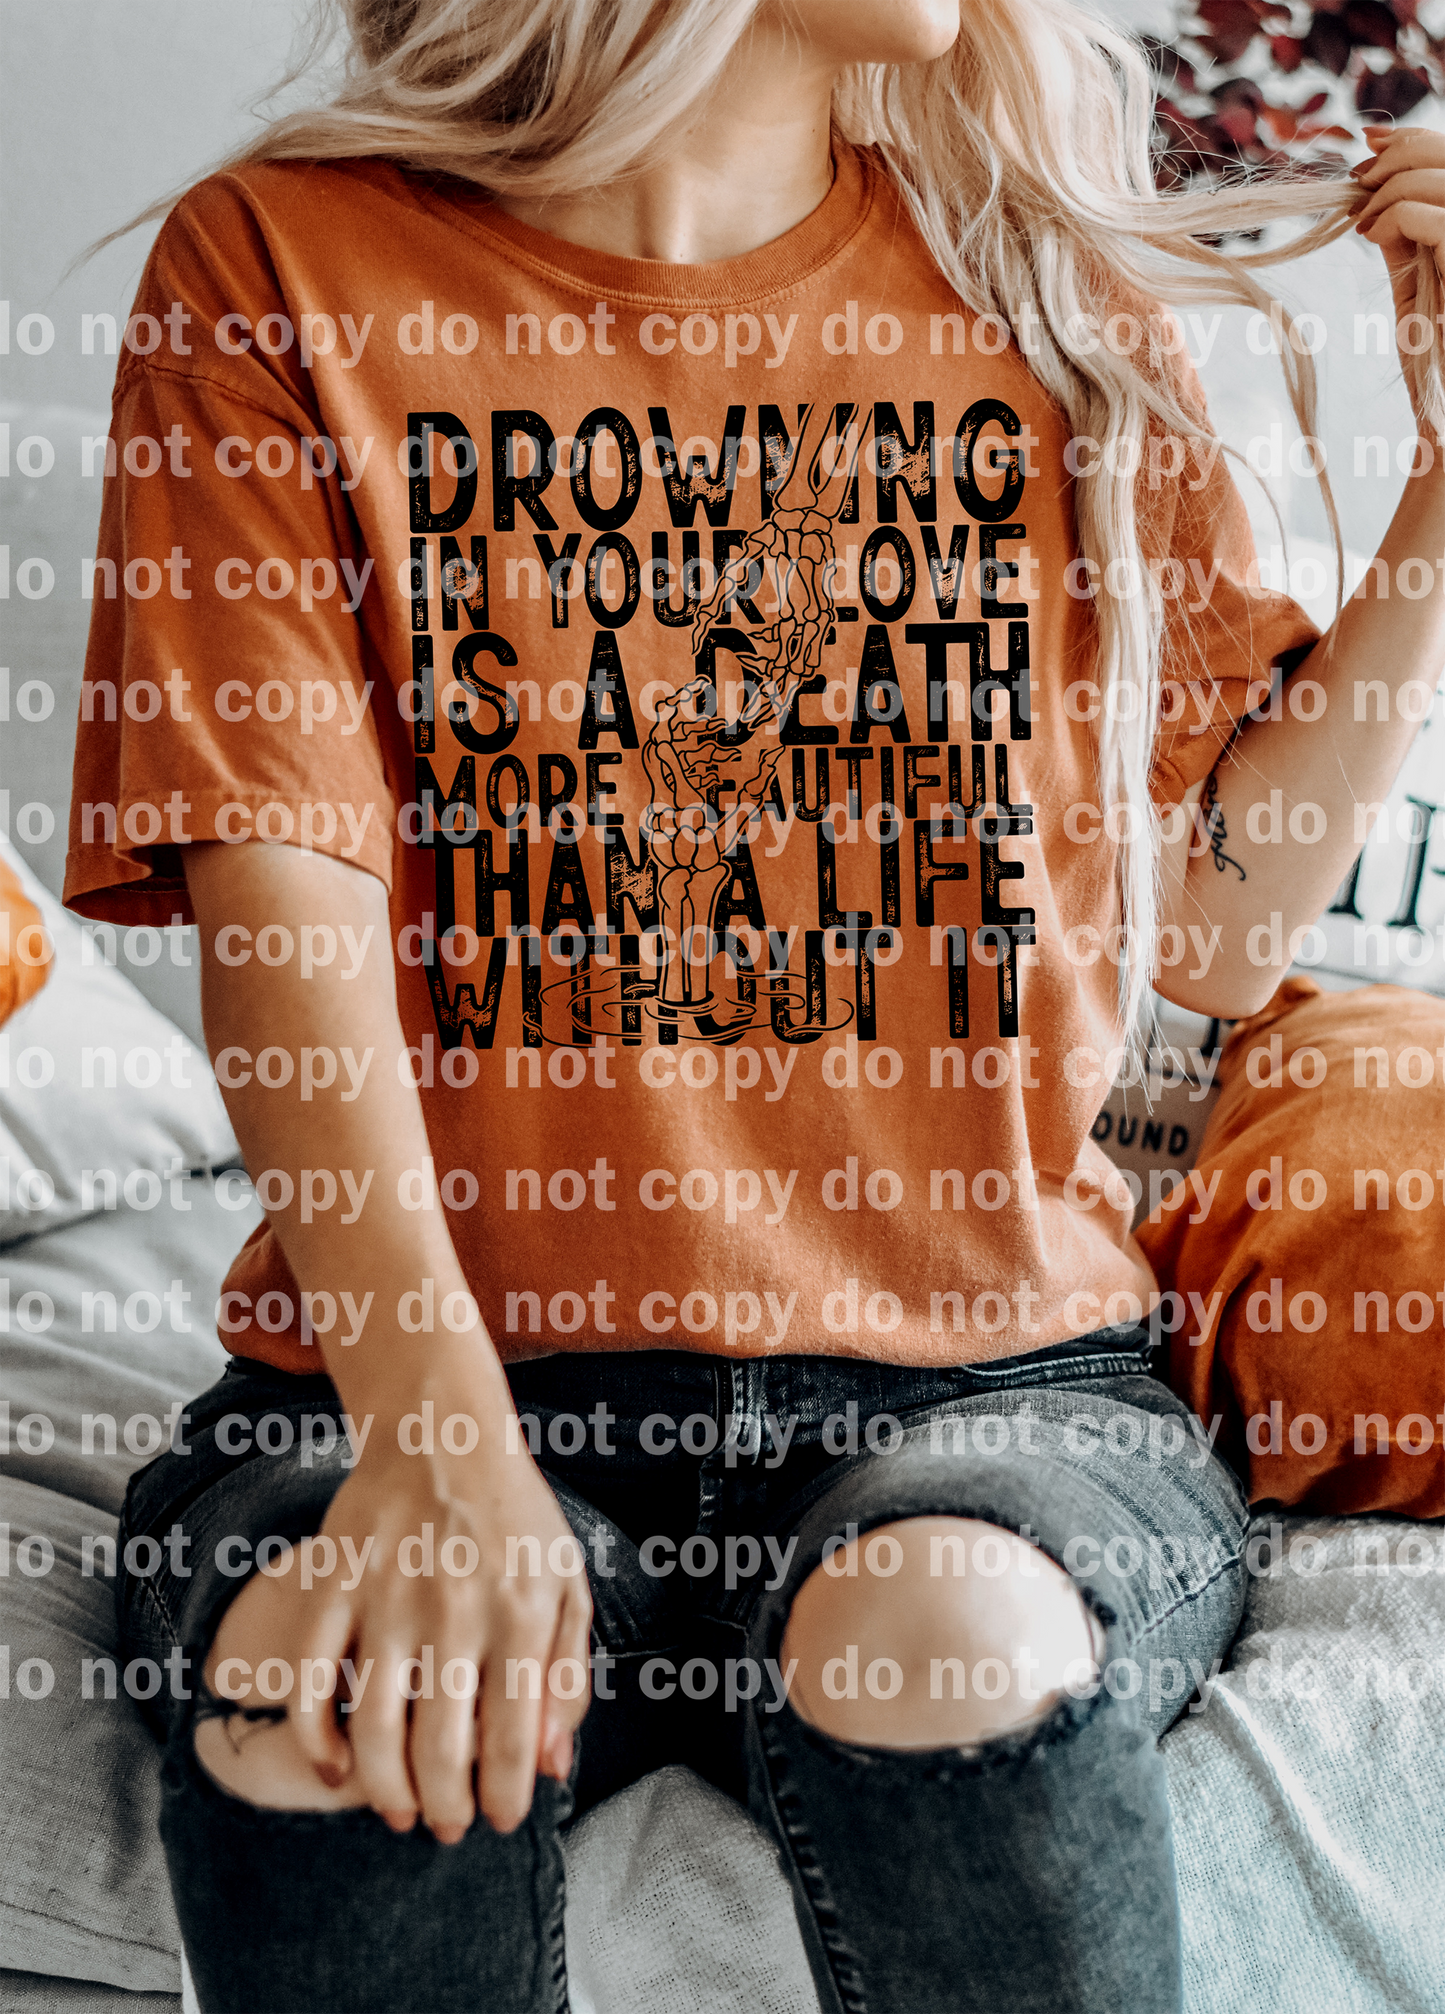 Drowning In Your Love Is A Death More Beautiful Than A Life Without It Skellie Hand Distressed Dream Print or Sublimation Print